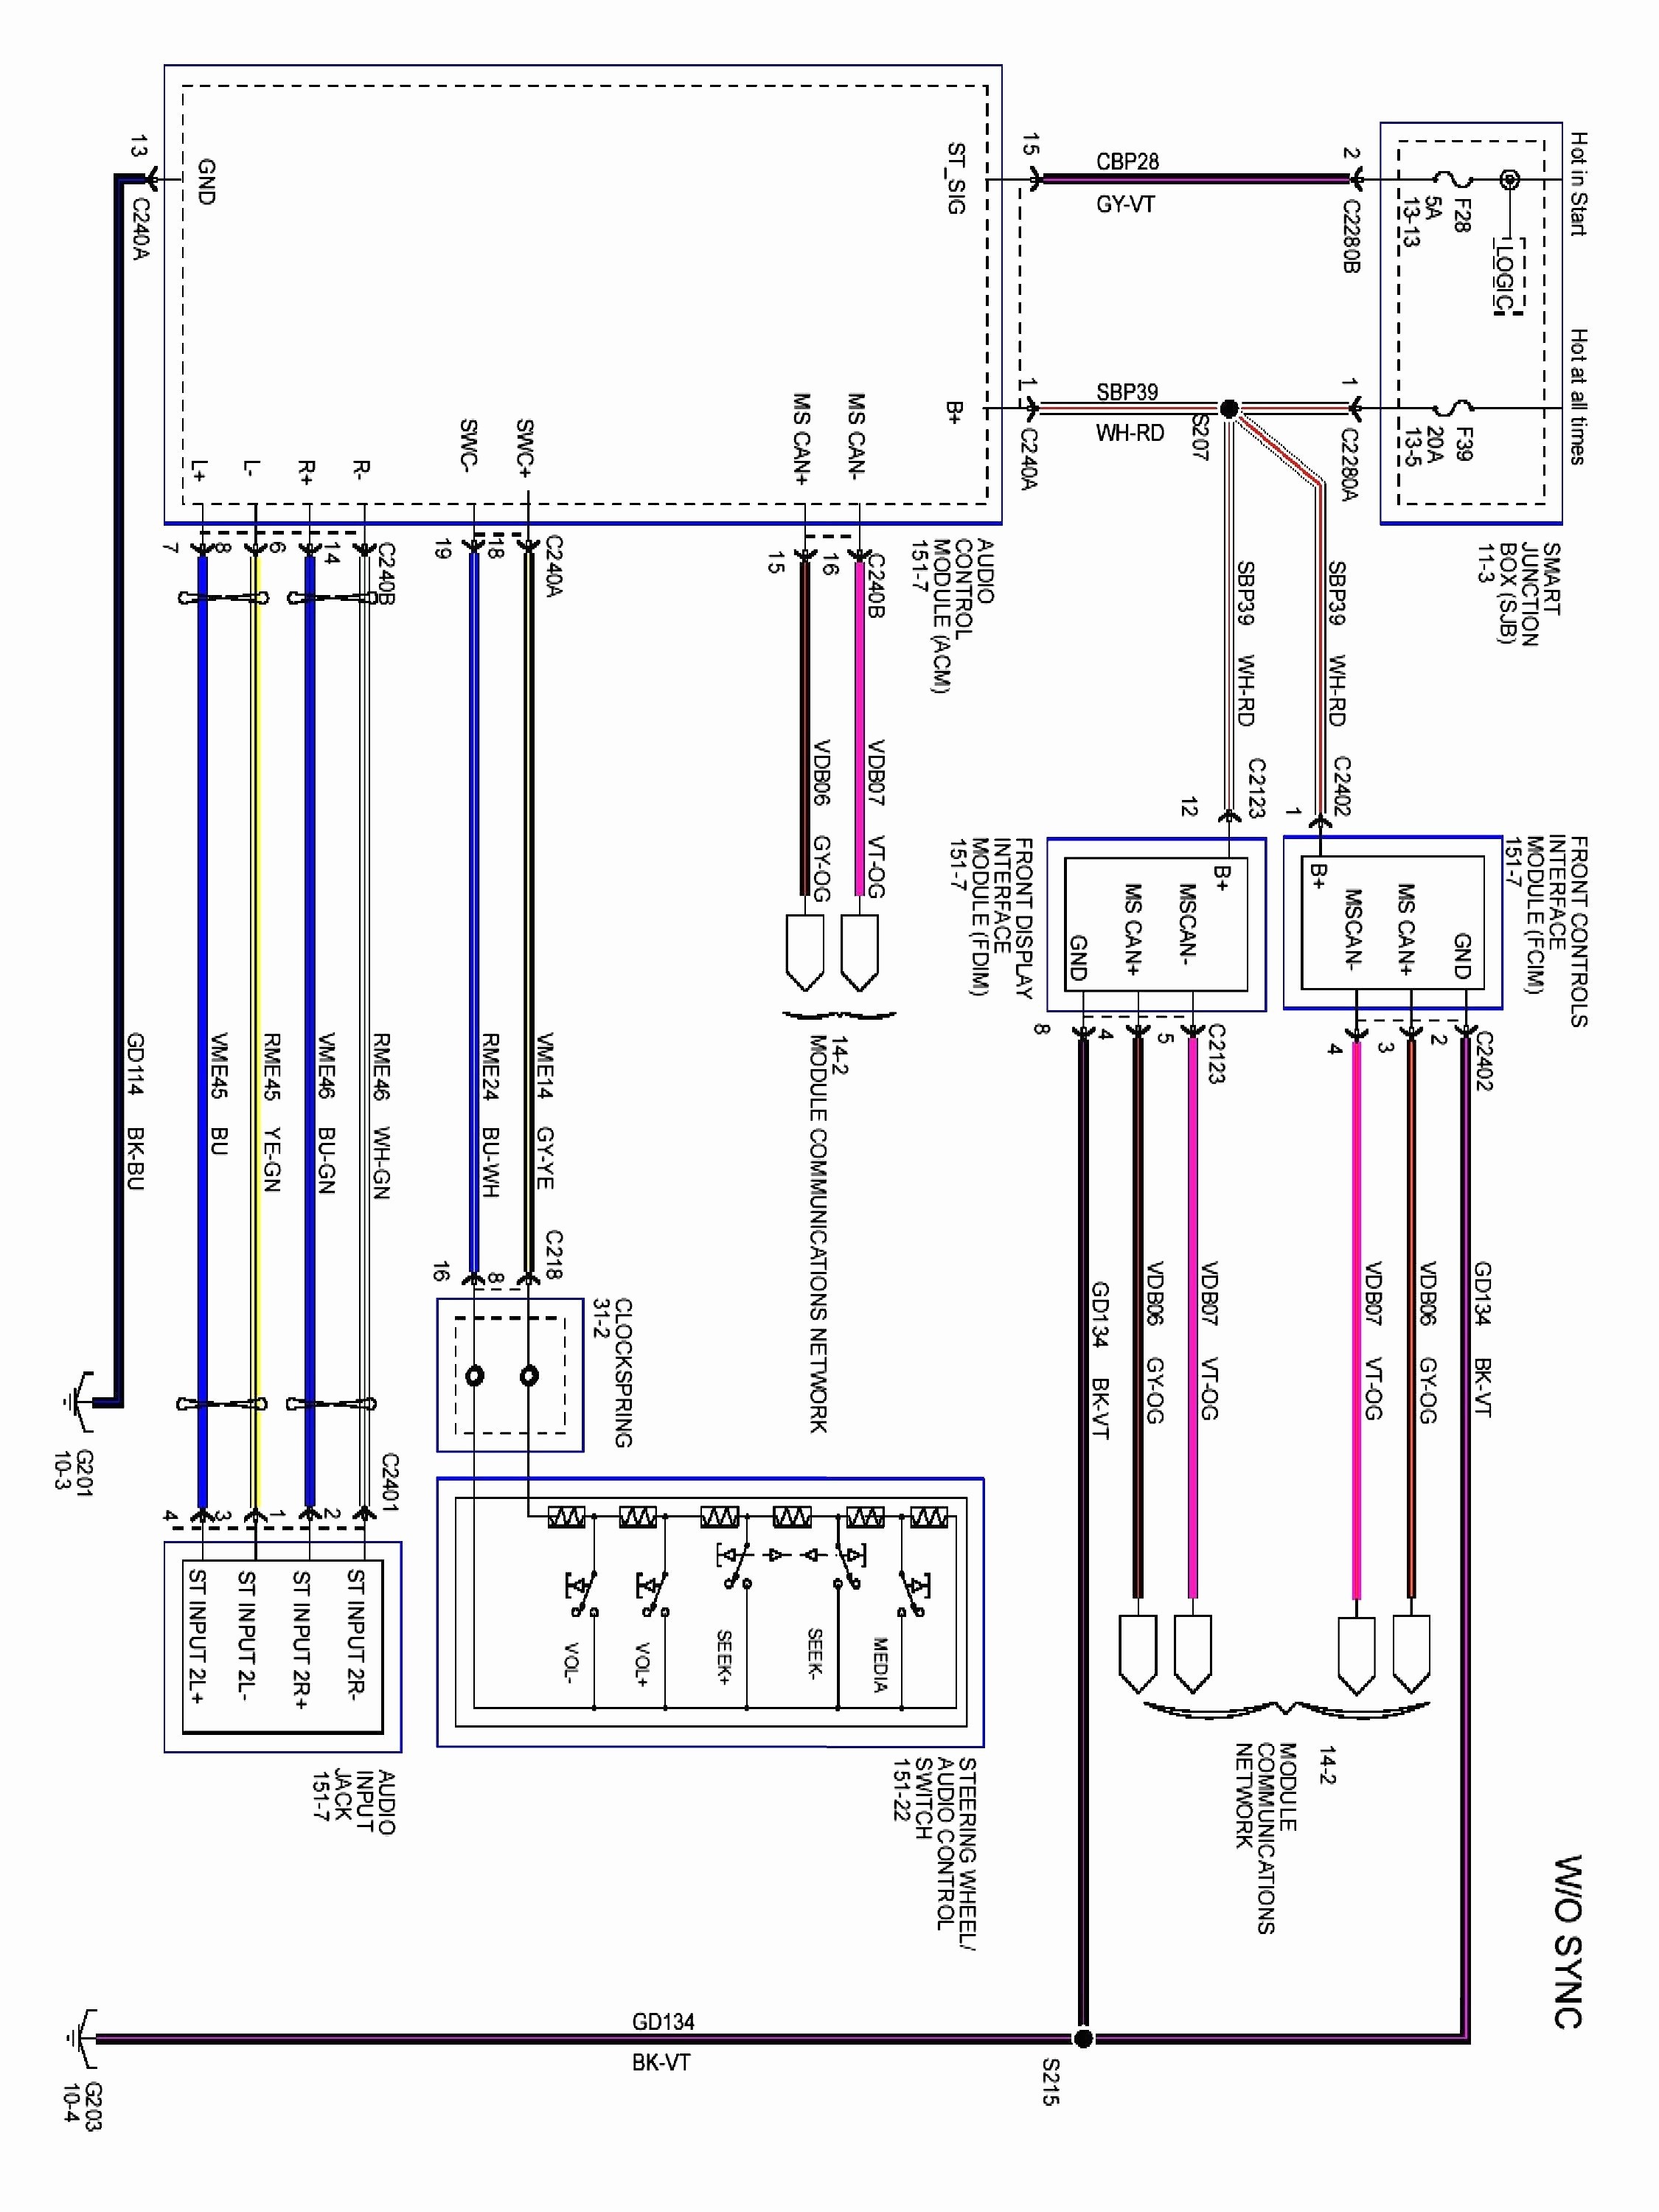 Wiring Diagram for Amplifier Car Stereo Best Amplifier Wiring Diagram Inspirational Car Stereo Wiring Diagrams 0d